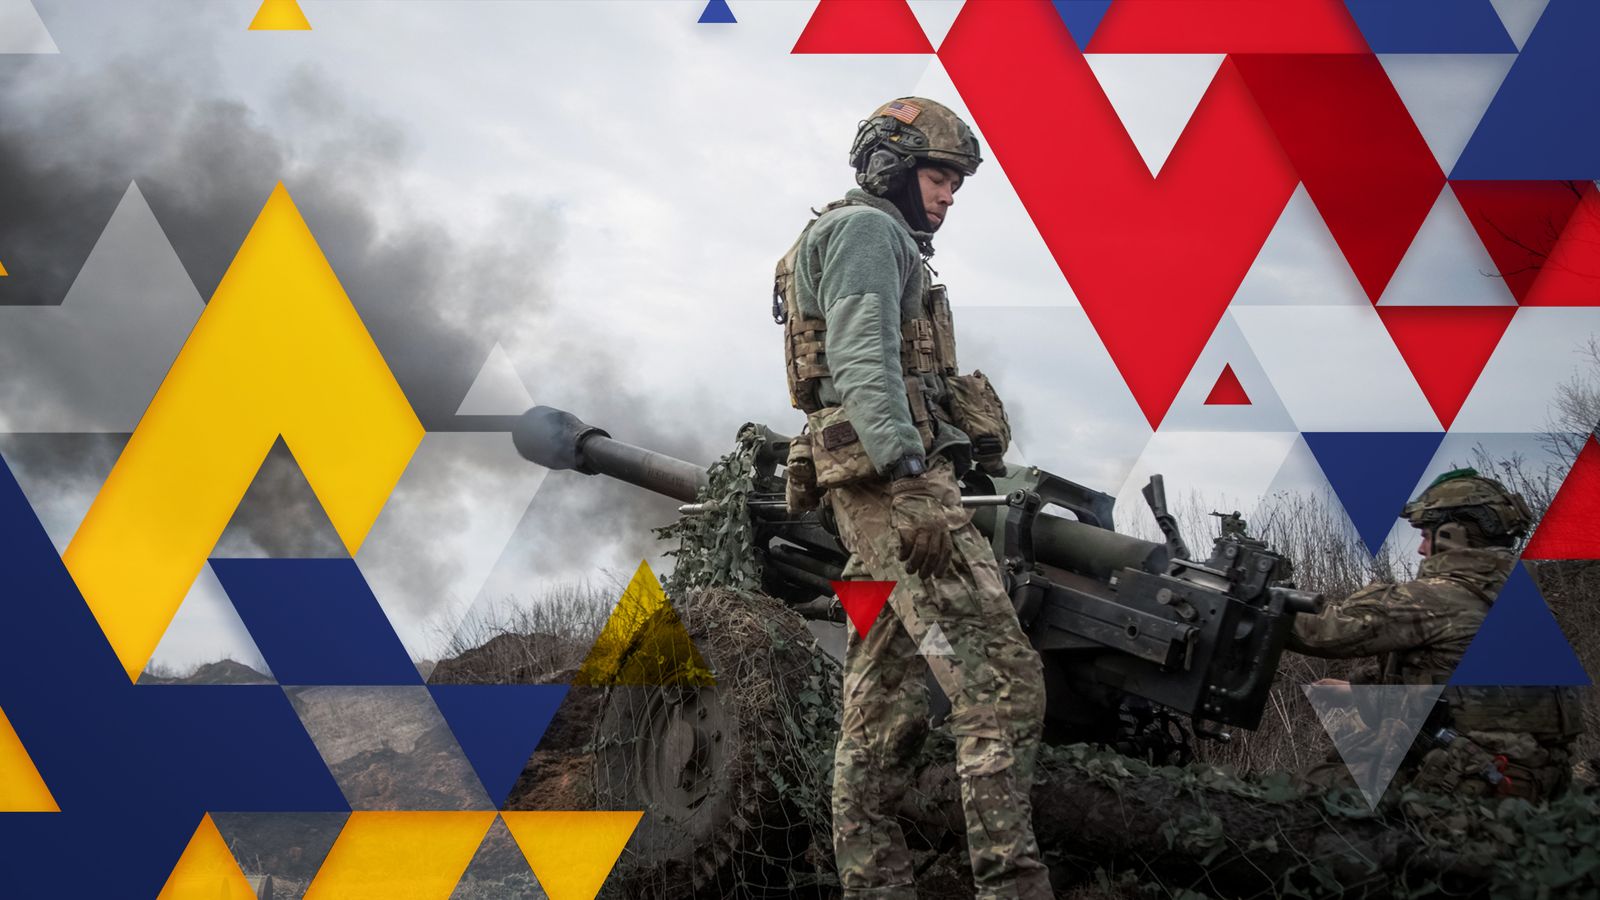 Ukraine must embrace the West's 'manoeuvre warfare' instead of being dragged into traditional Russian-style combat